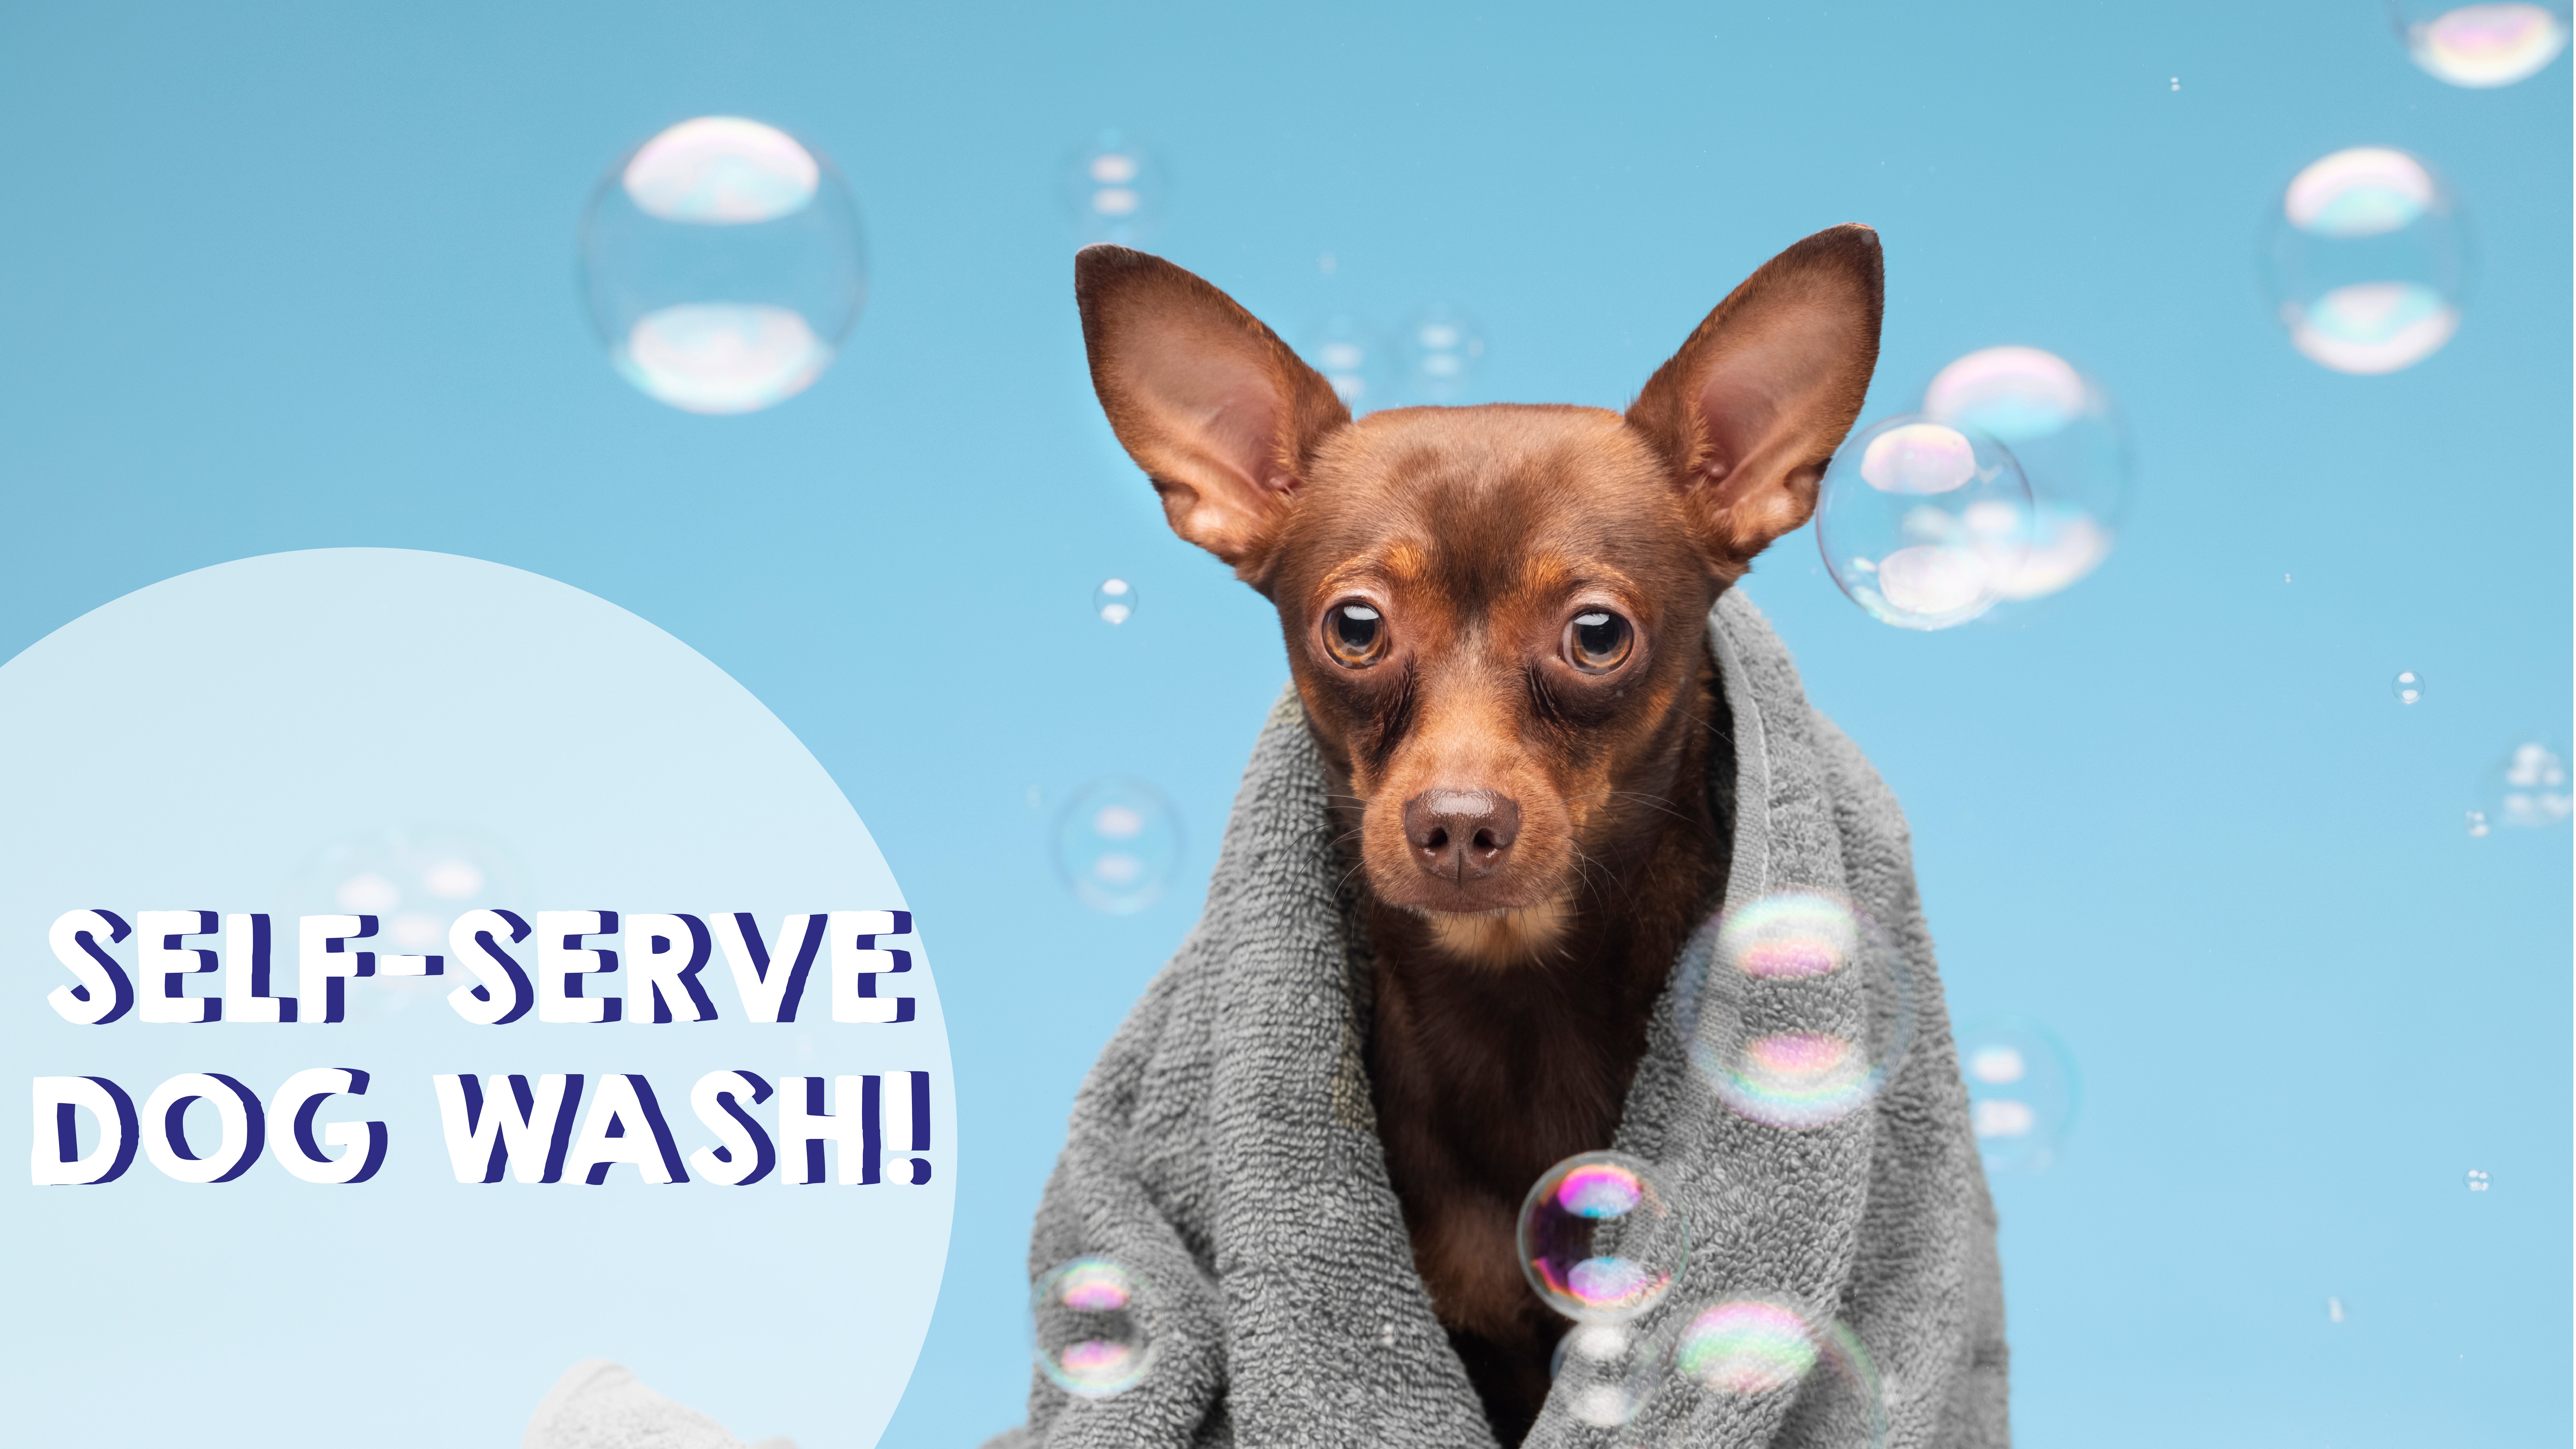 How to Use Our Self-Serve Dog Wash